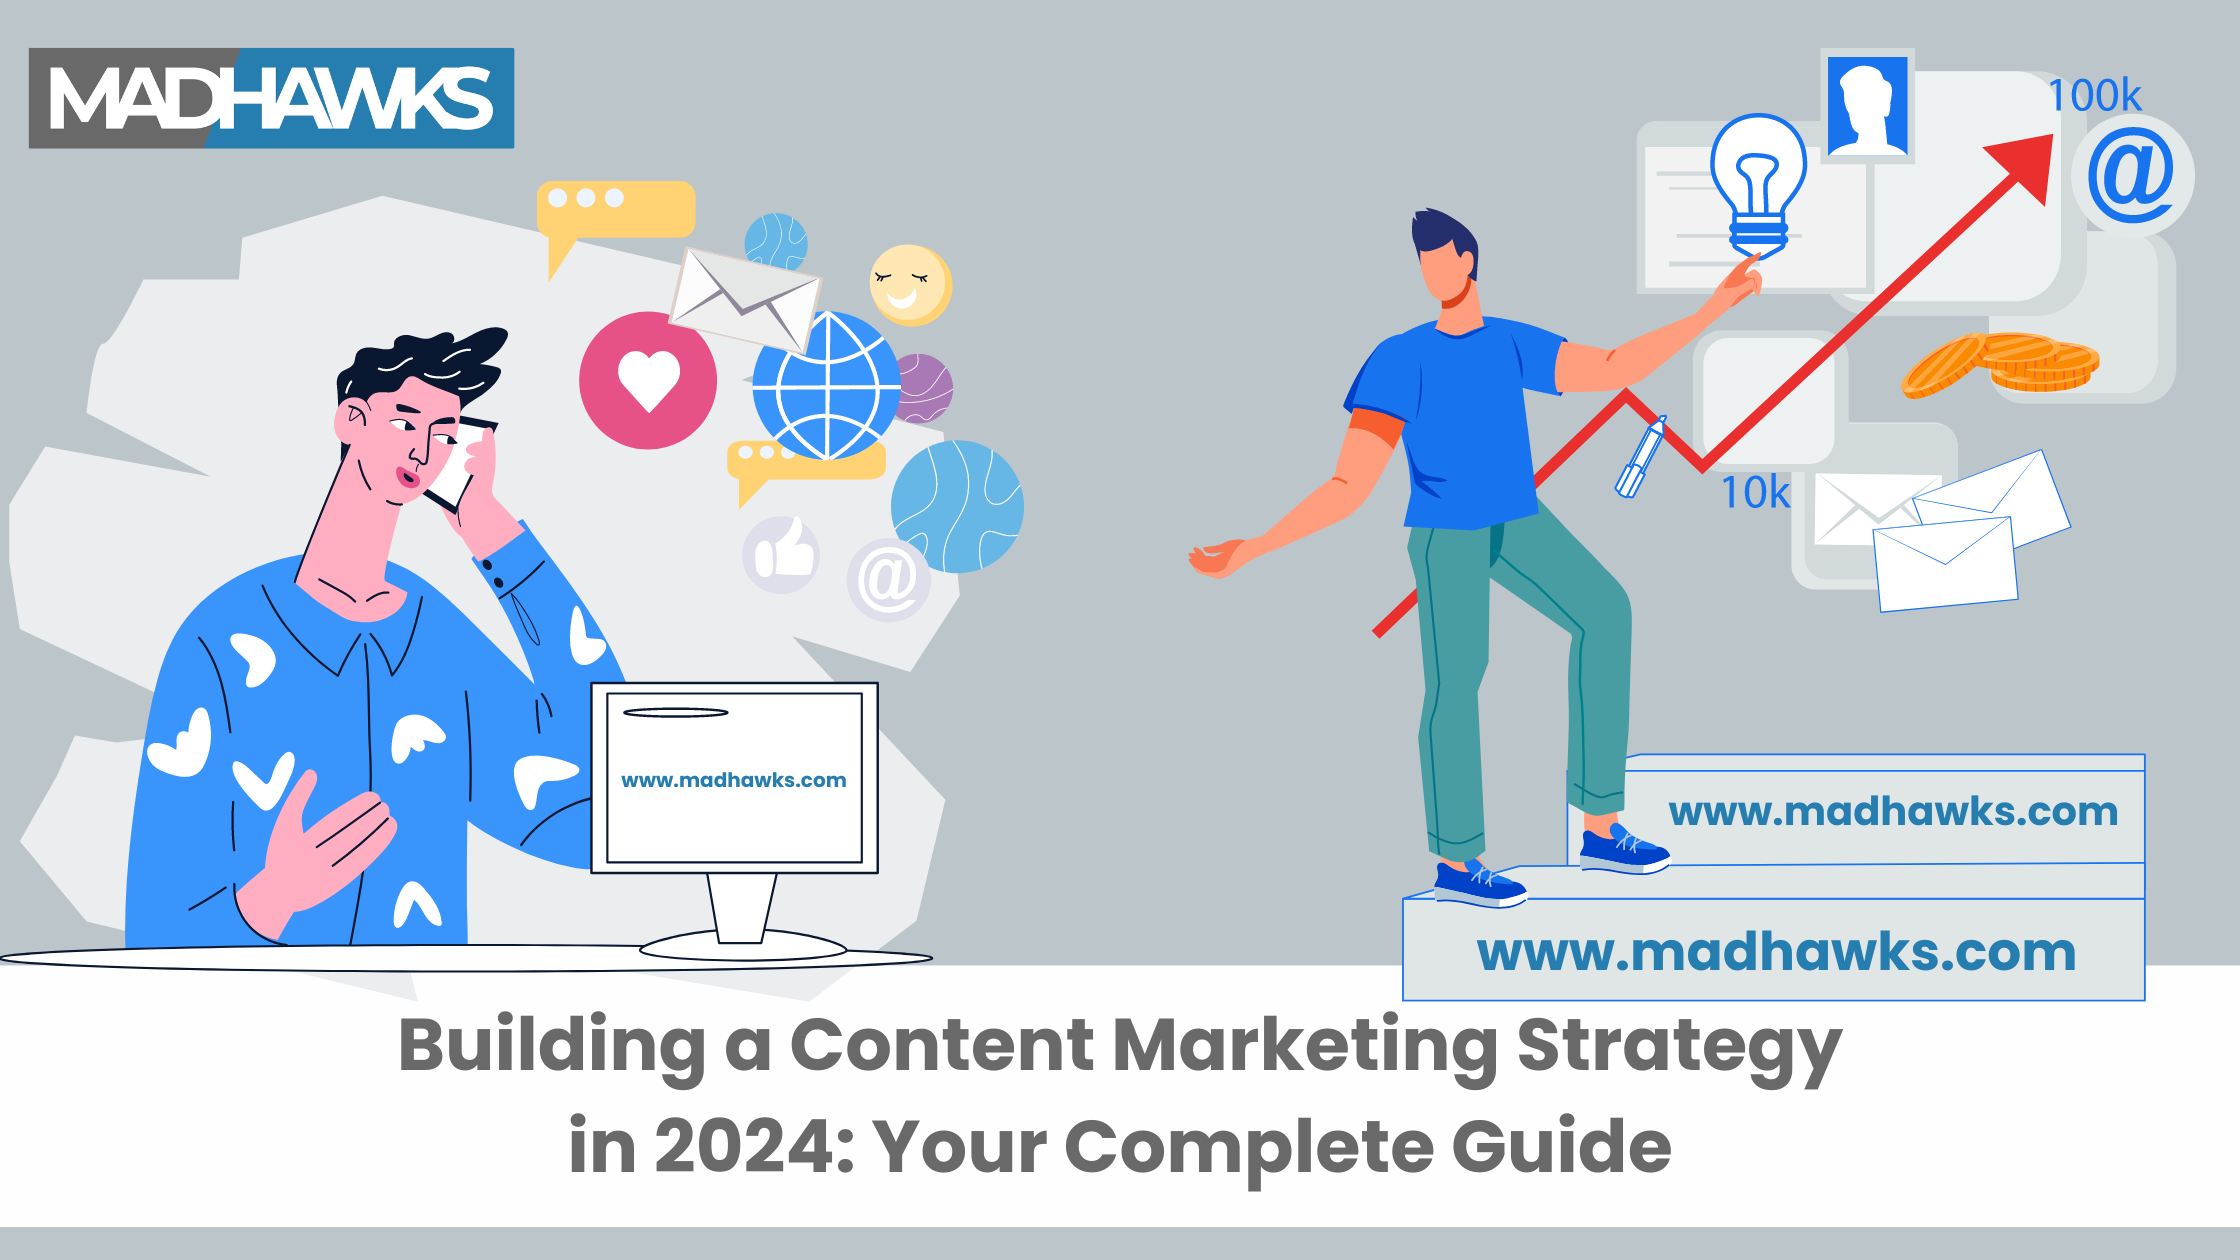 Building a Content Marketing Strategy in 2024: Your Complete Guide